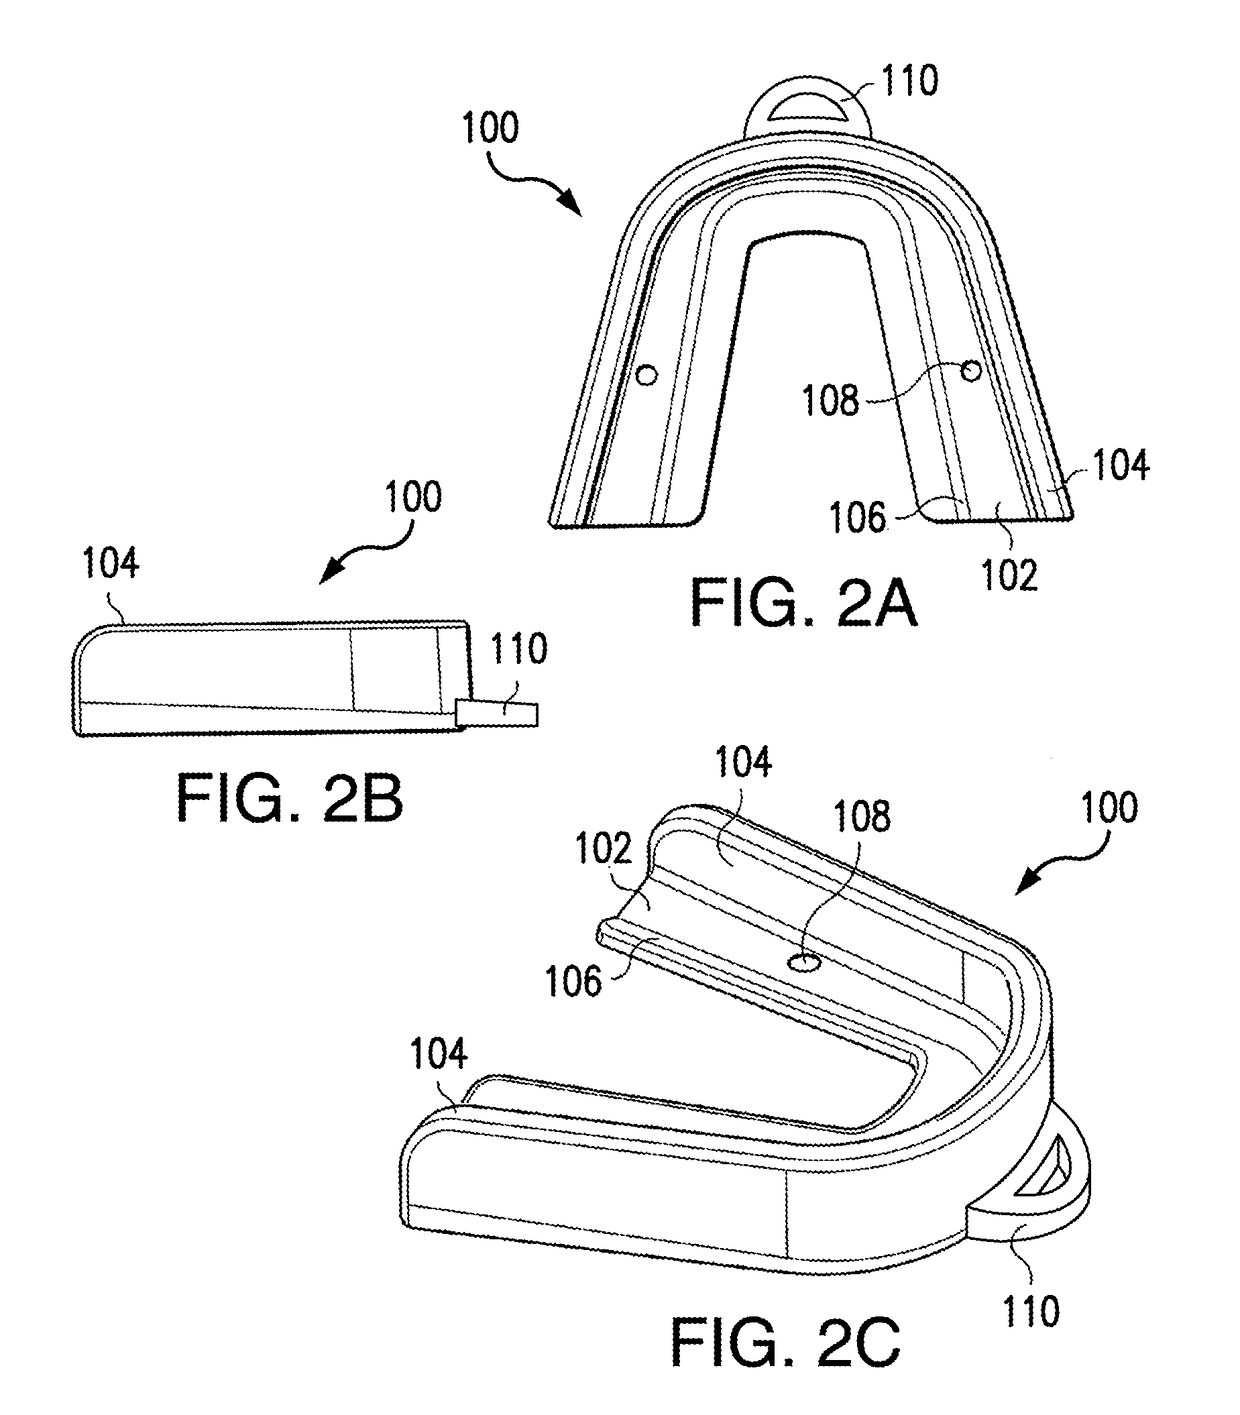 Device and System for Improved Breathing